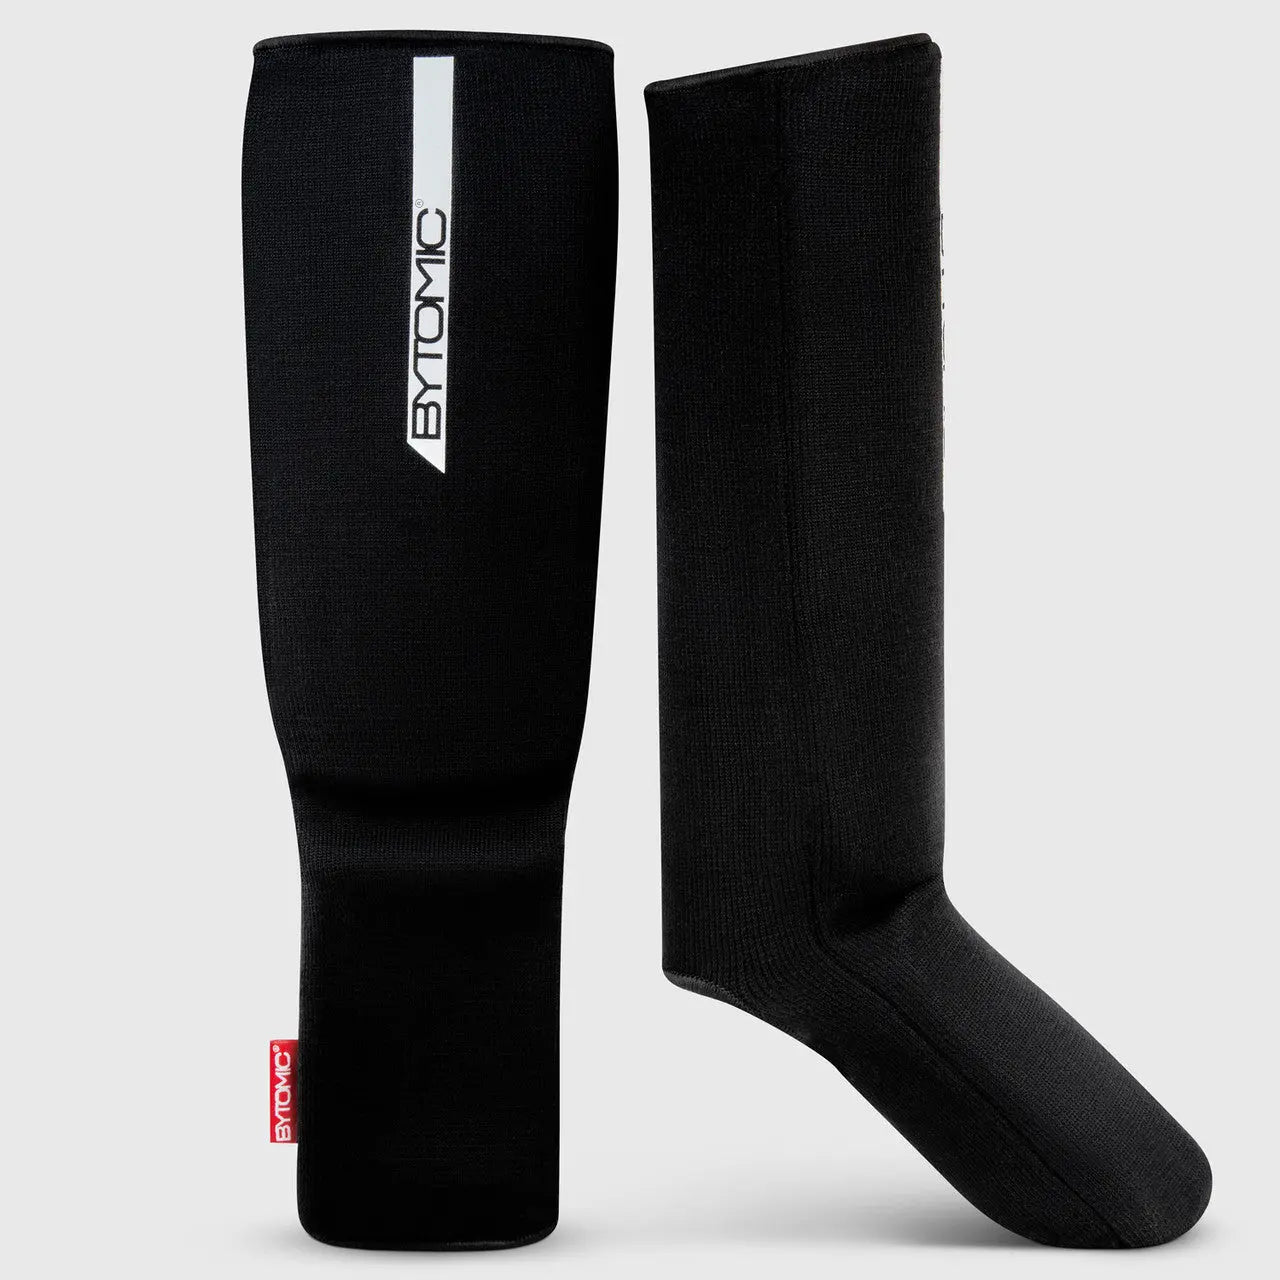 Bytomic Red Label Elasticated Shin/Instep Bytomic